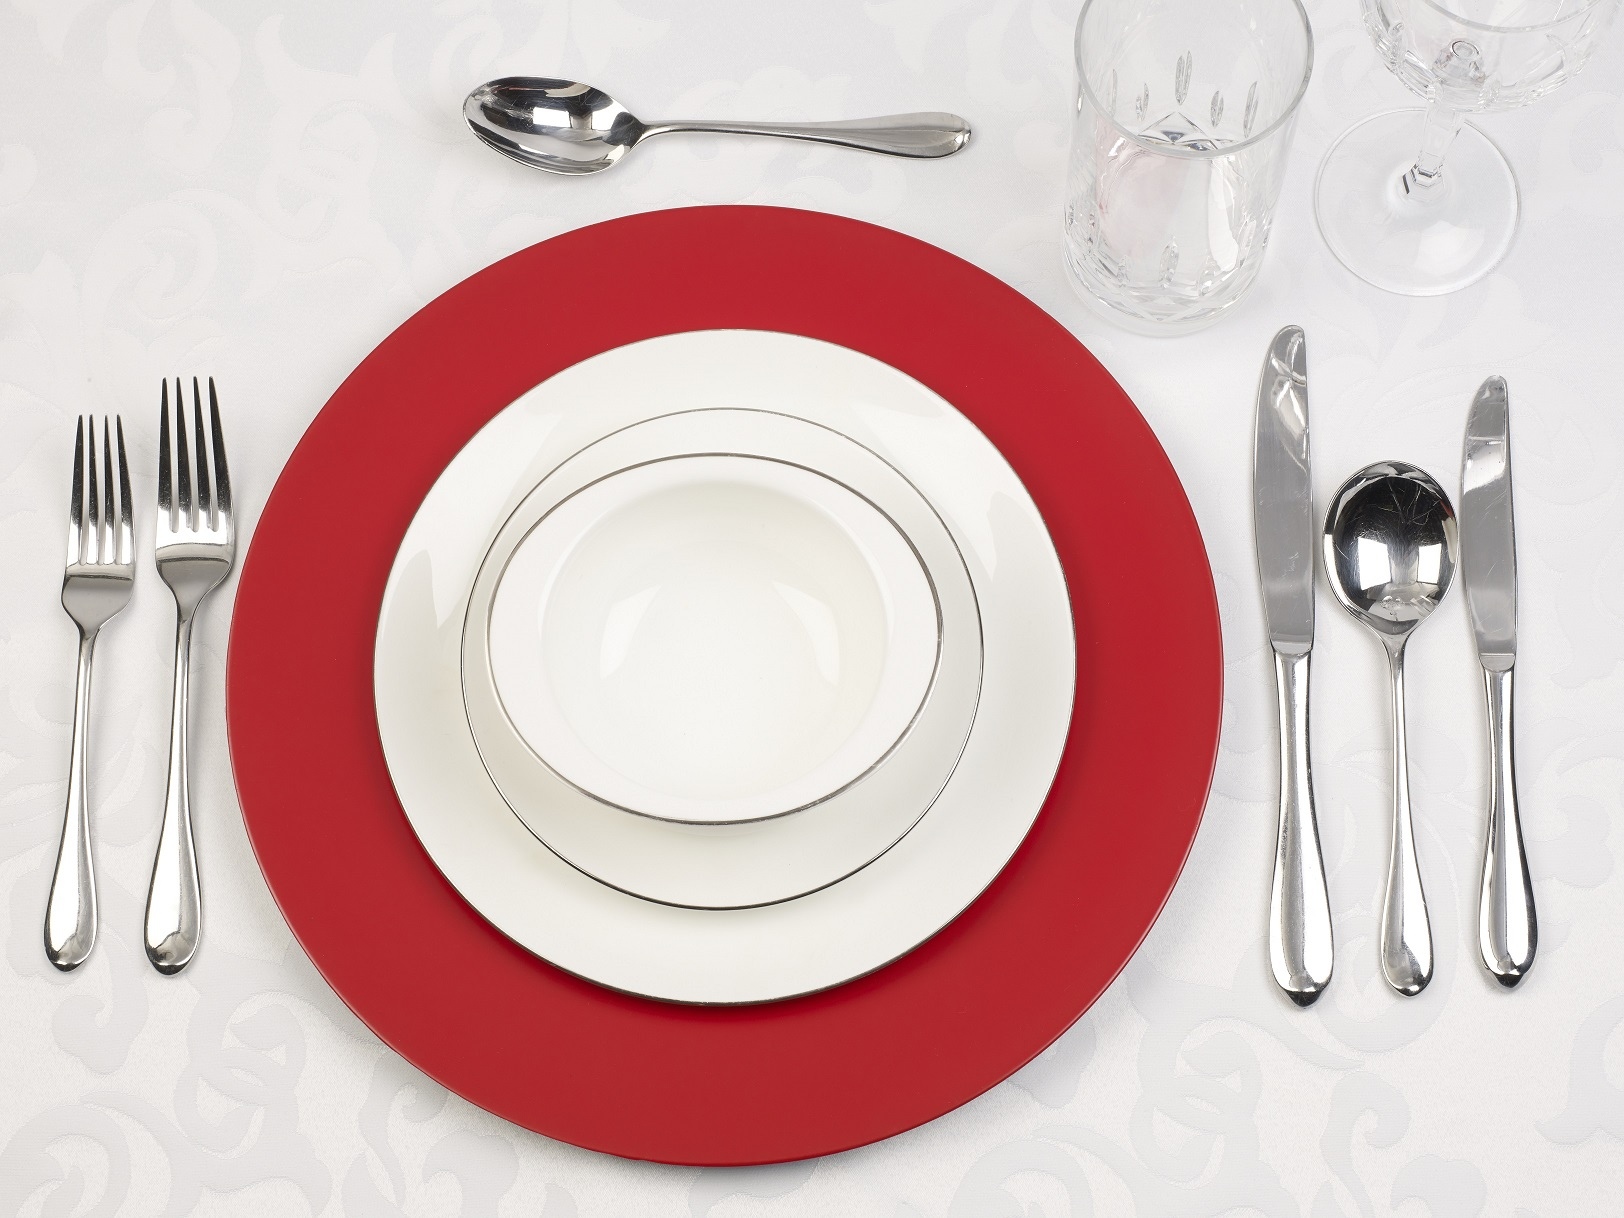 1. Spizy Decorative Charger Under Plates Dinner Dining.